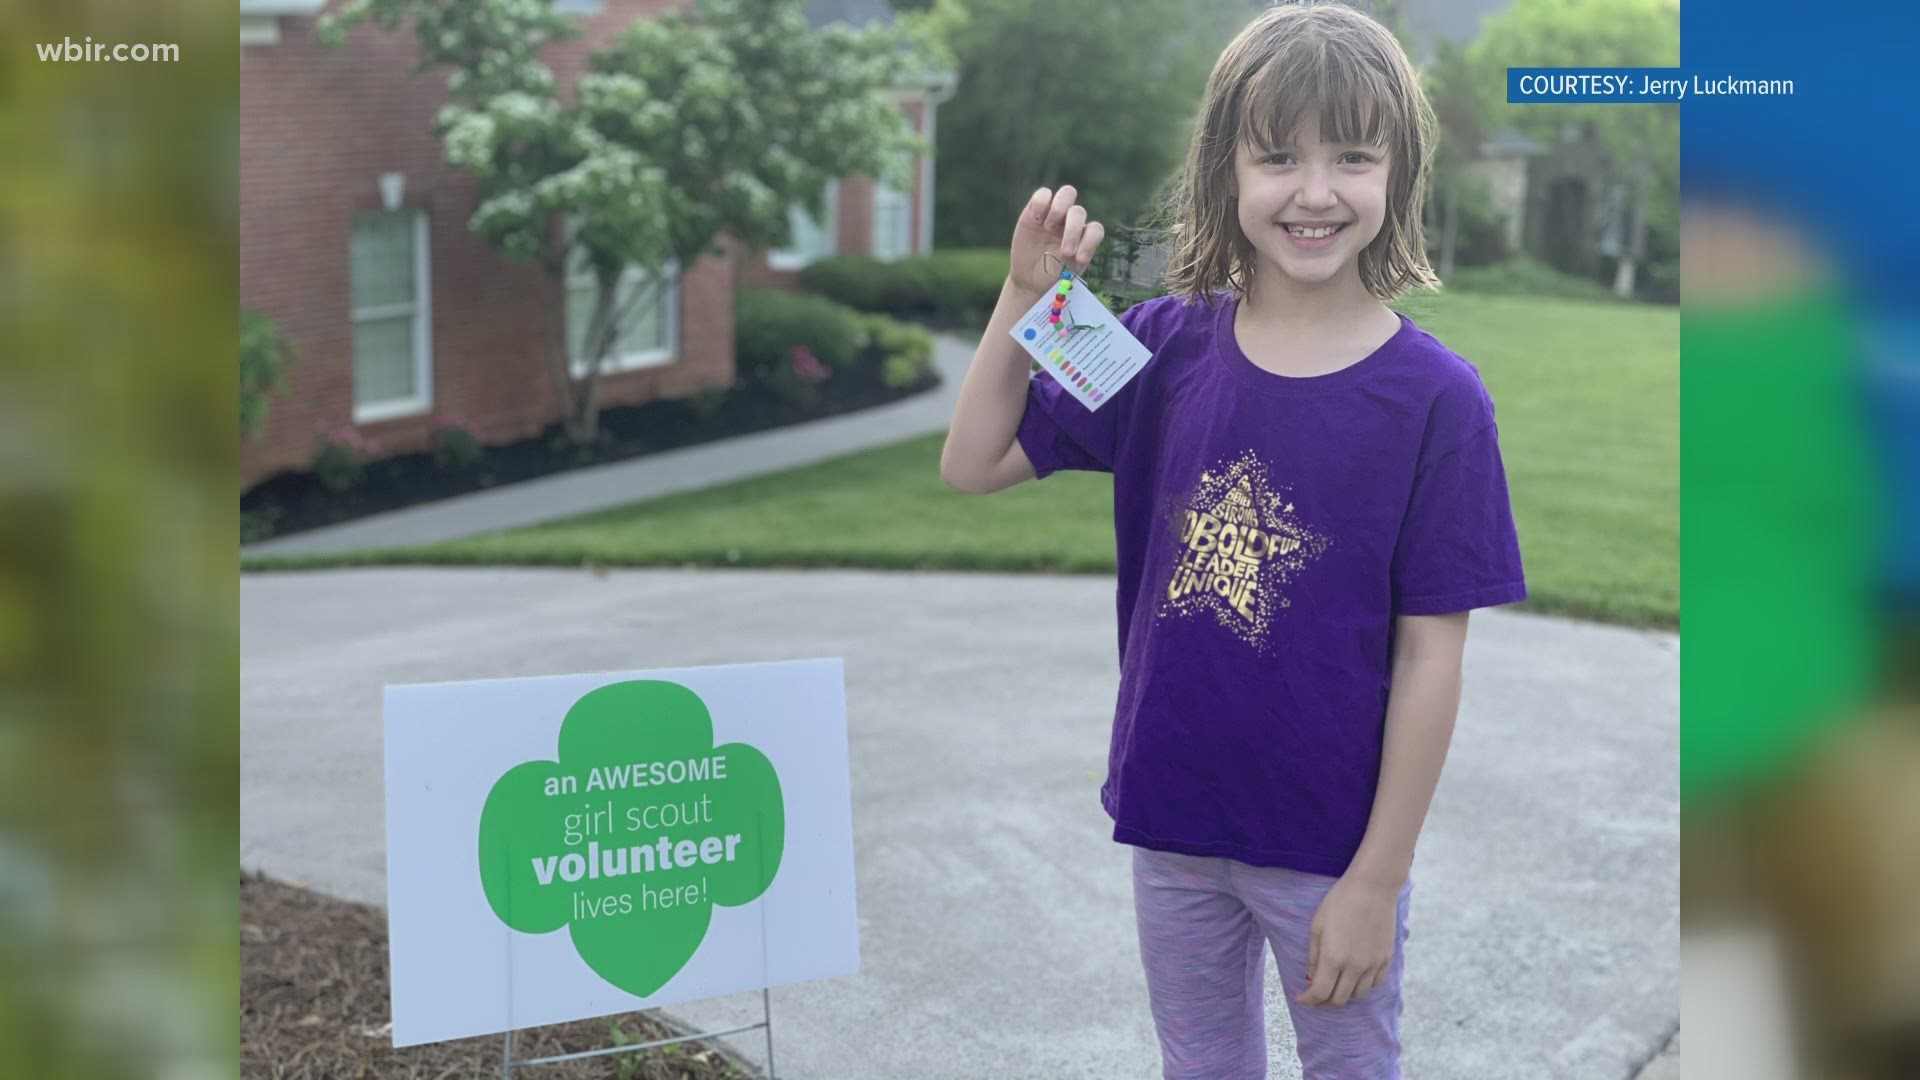 In Oak Ridge, scout leaders posted dozens of signs praising Girl Scout volunteers. It was up to the scouts to find those signs.